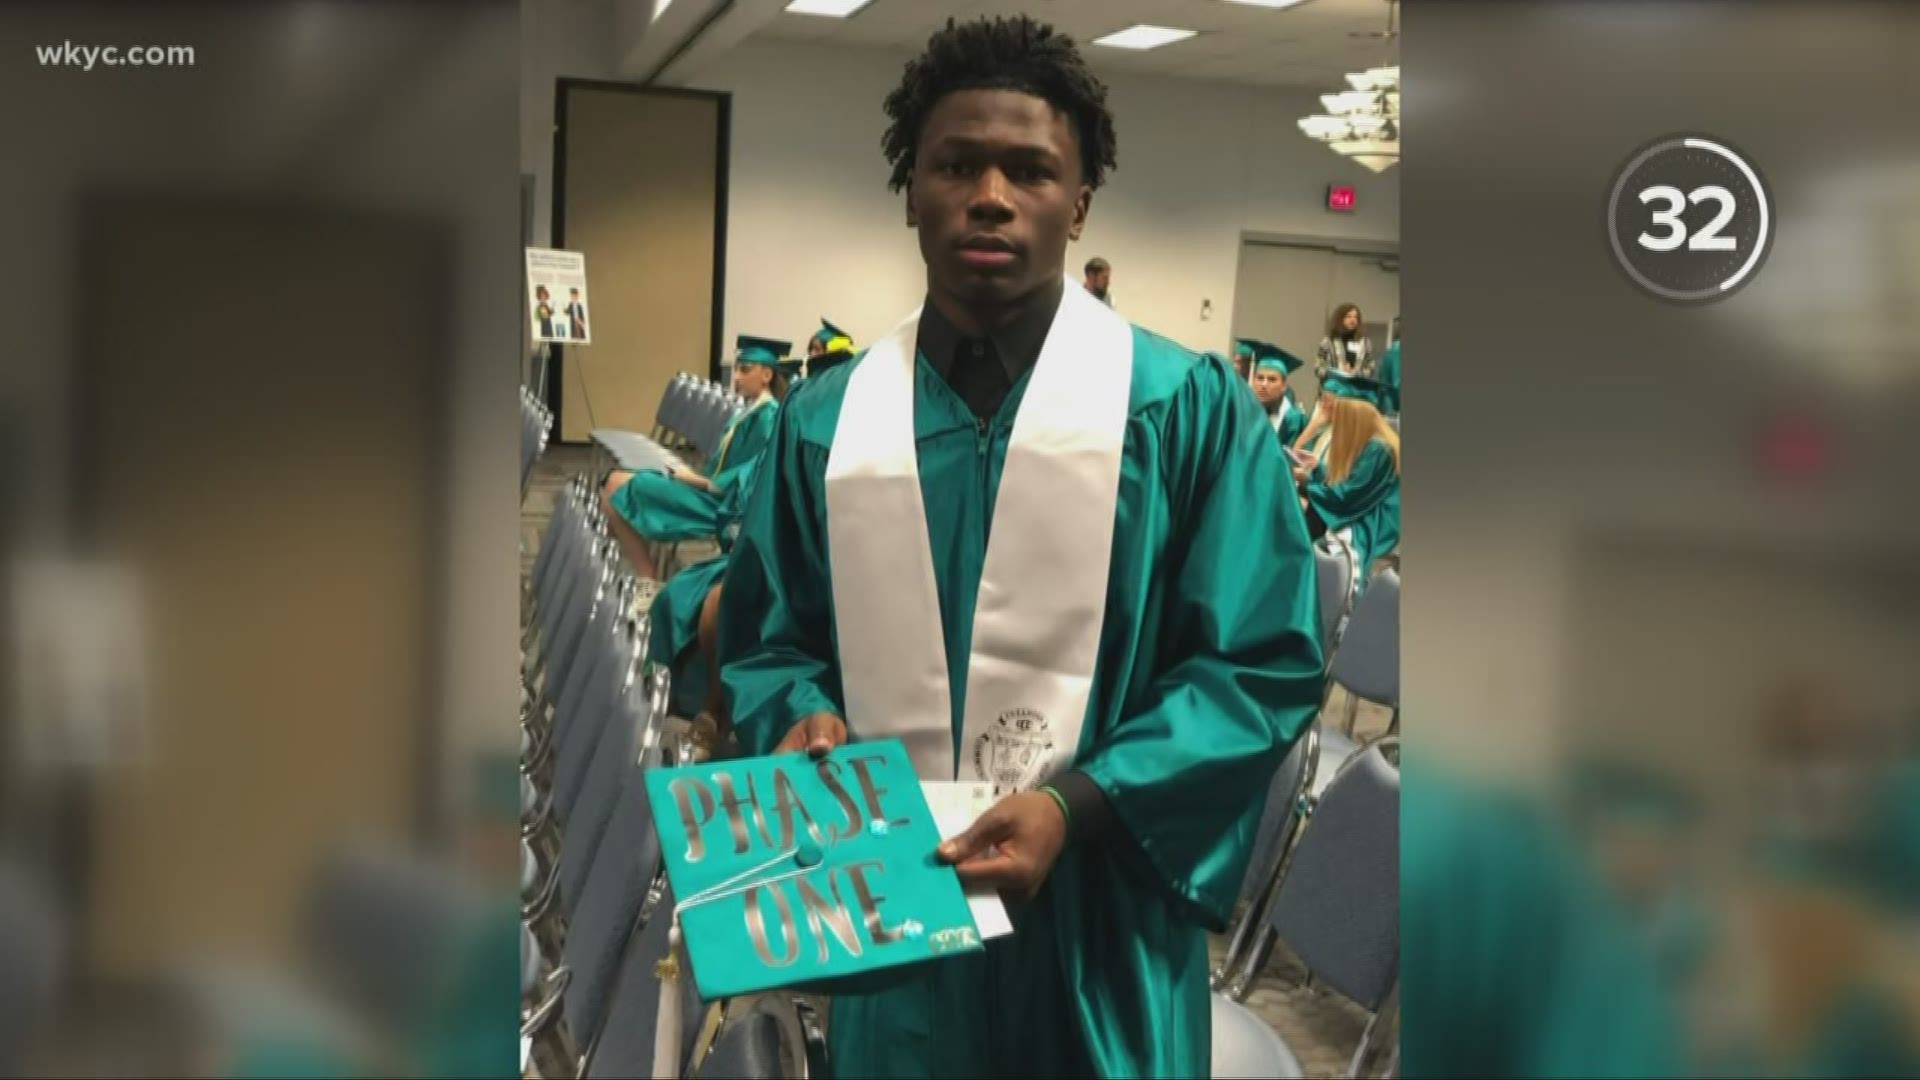 Cameron Ray won't graduate from high school until 2021. However, he now has his associate's degree from Cuyahoga Community College.